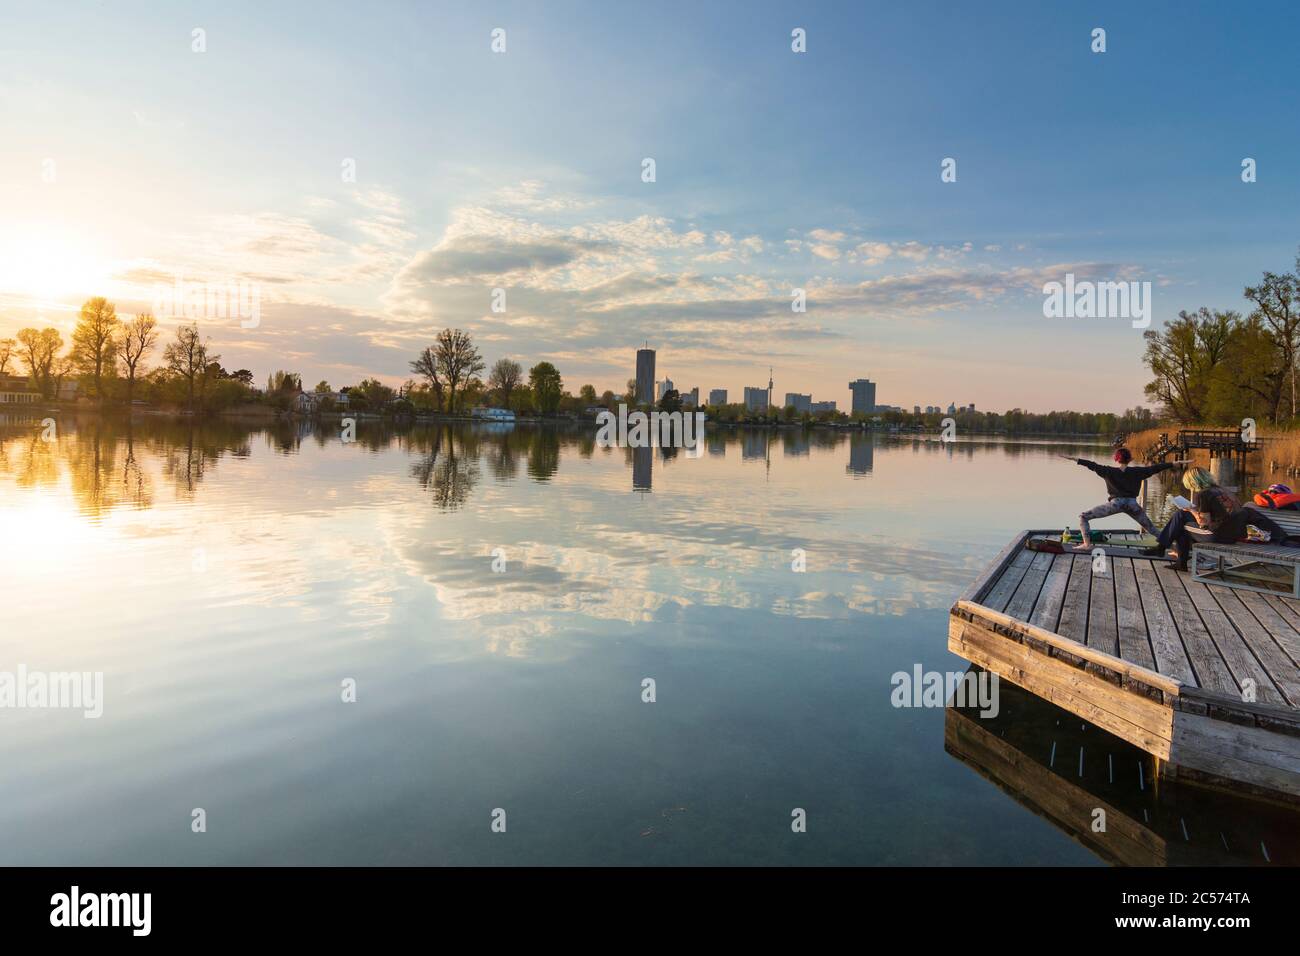 Vienna, people doing yoga and sitting at benches at wooden platforms at river Alte Donau (Old Danube) at sunset, in 22. Donaustadt, Wien, Austria Stock Photo